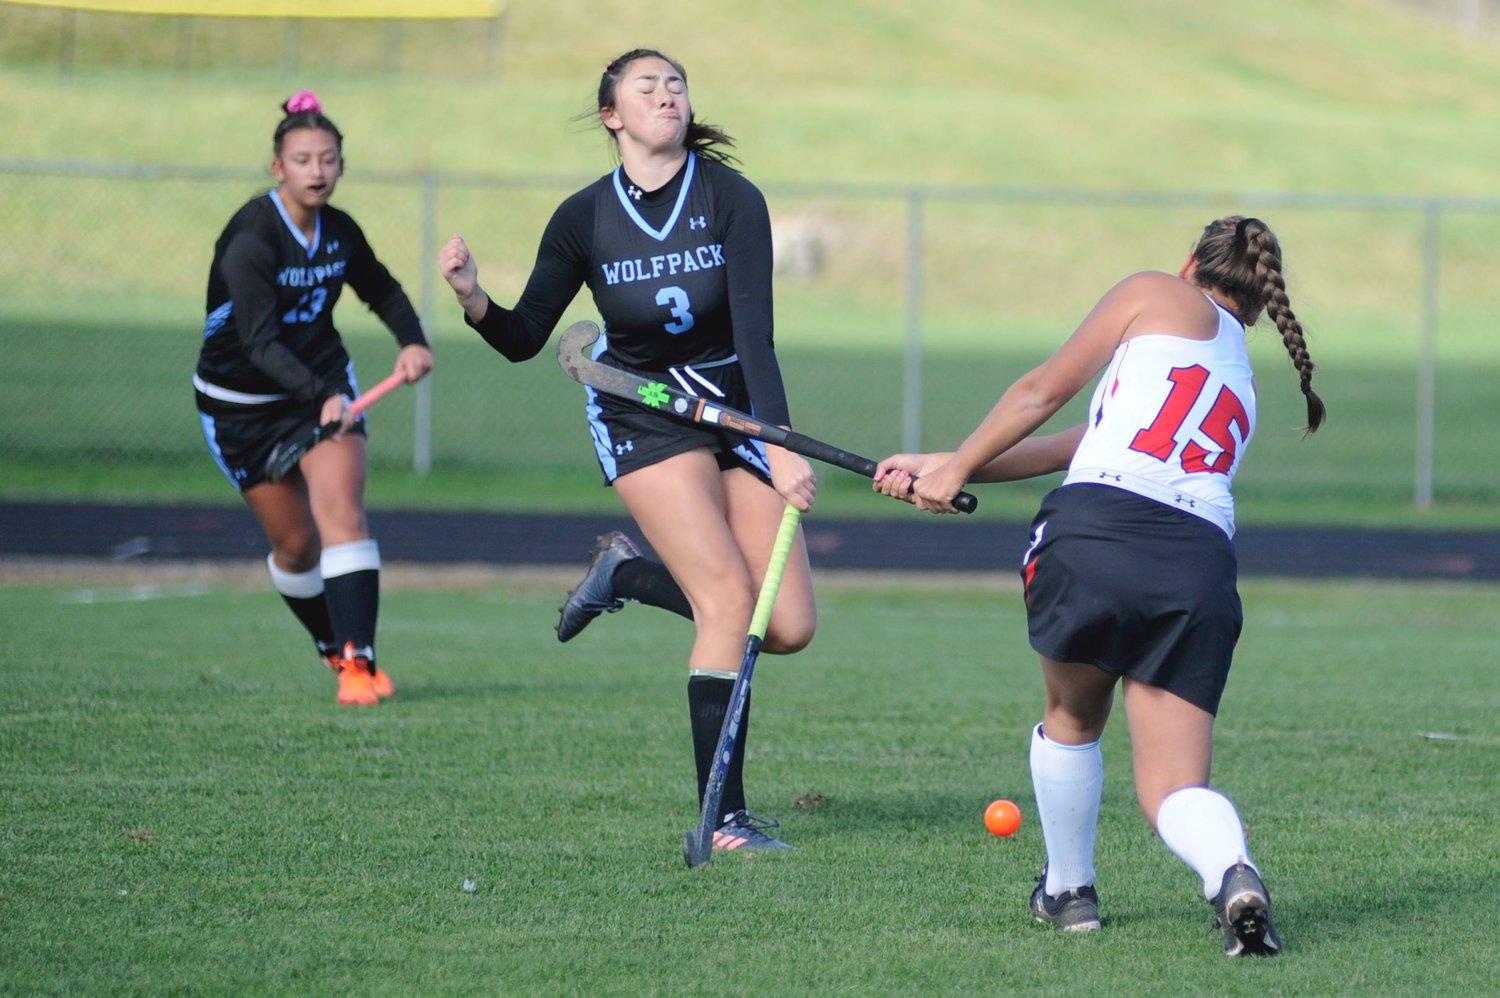 Wilkes Barre defender Candaladia Washinski reacts as Honesdale’s Gina Dell’Aquila drives the ball upfield. Mikayla Faatz of the Wolfpack closes in on the action.